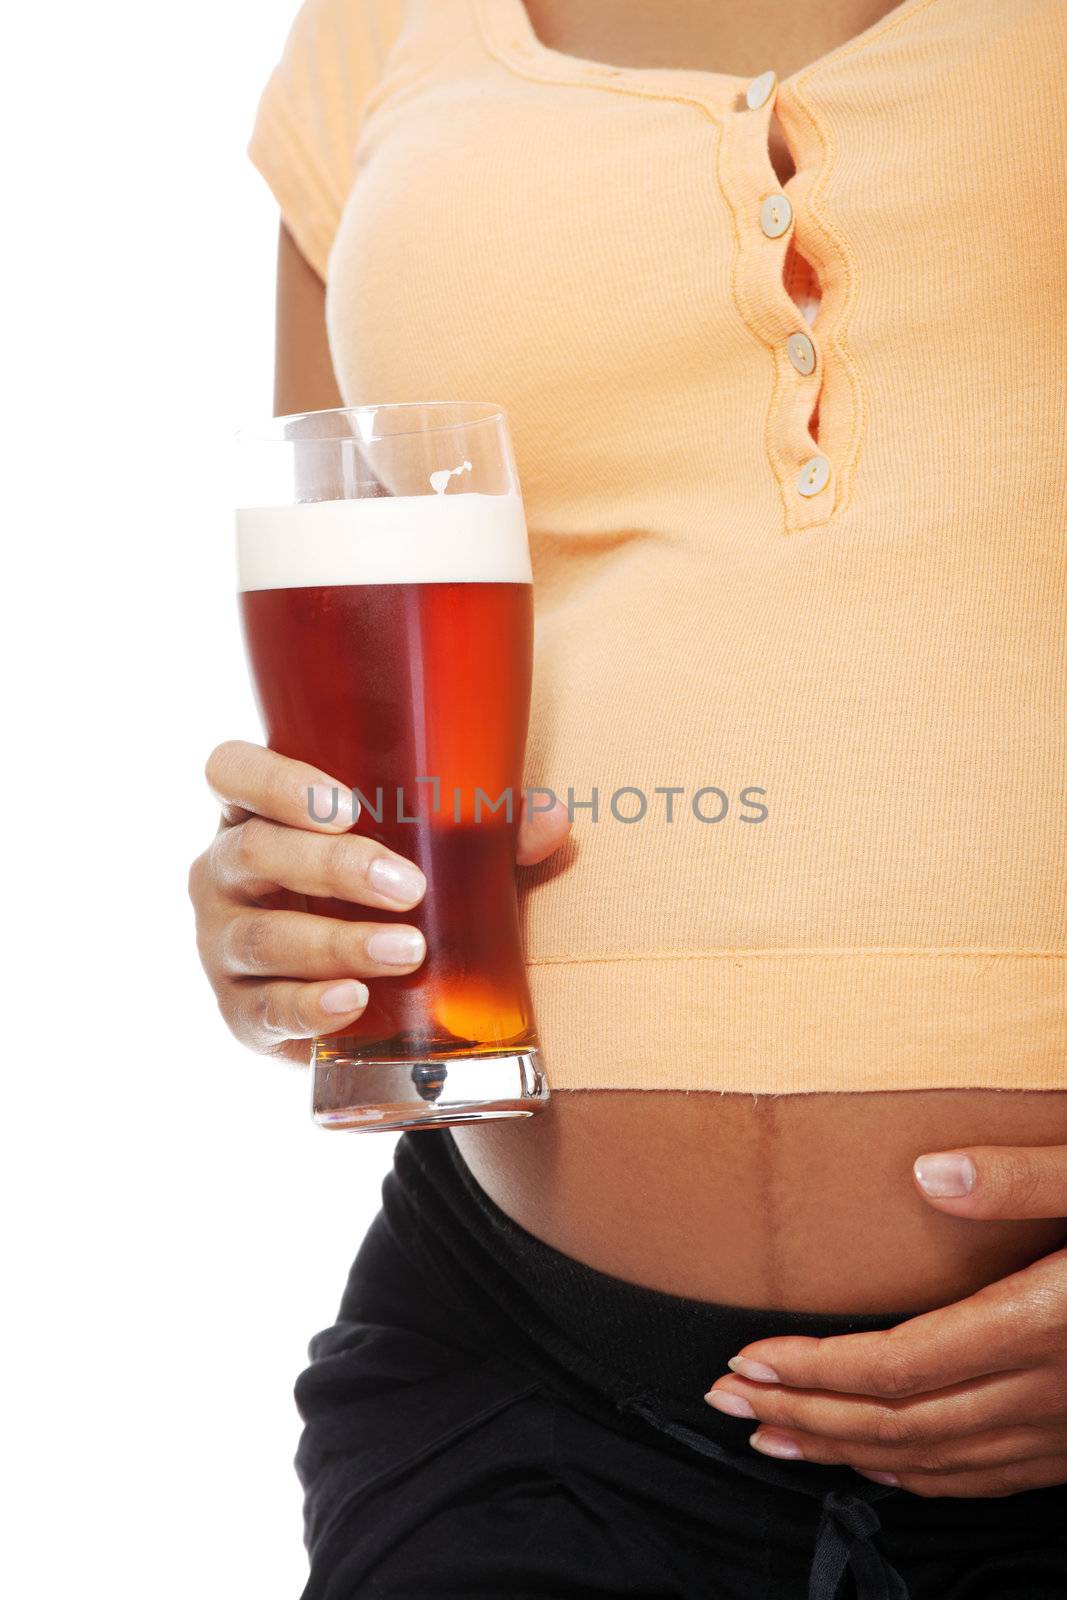 Belly closeup of a pregnant woman holding a glass alcohol next to her belly, over a white backgroung.